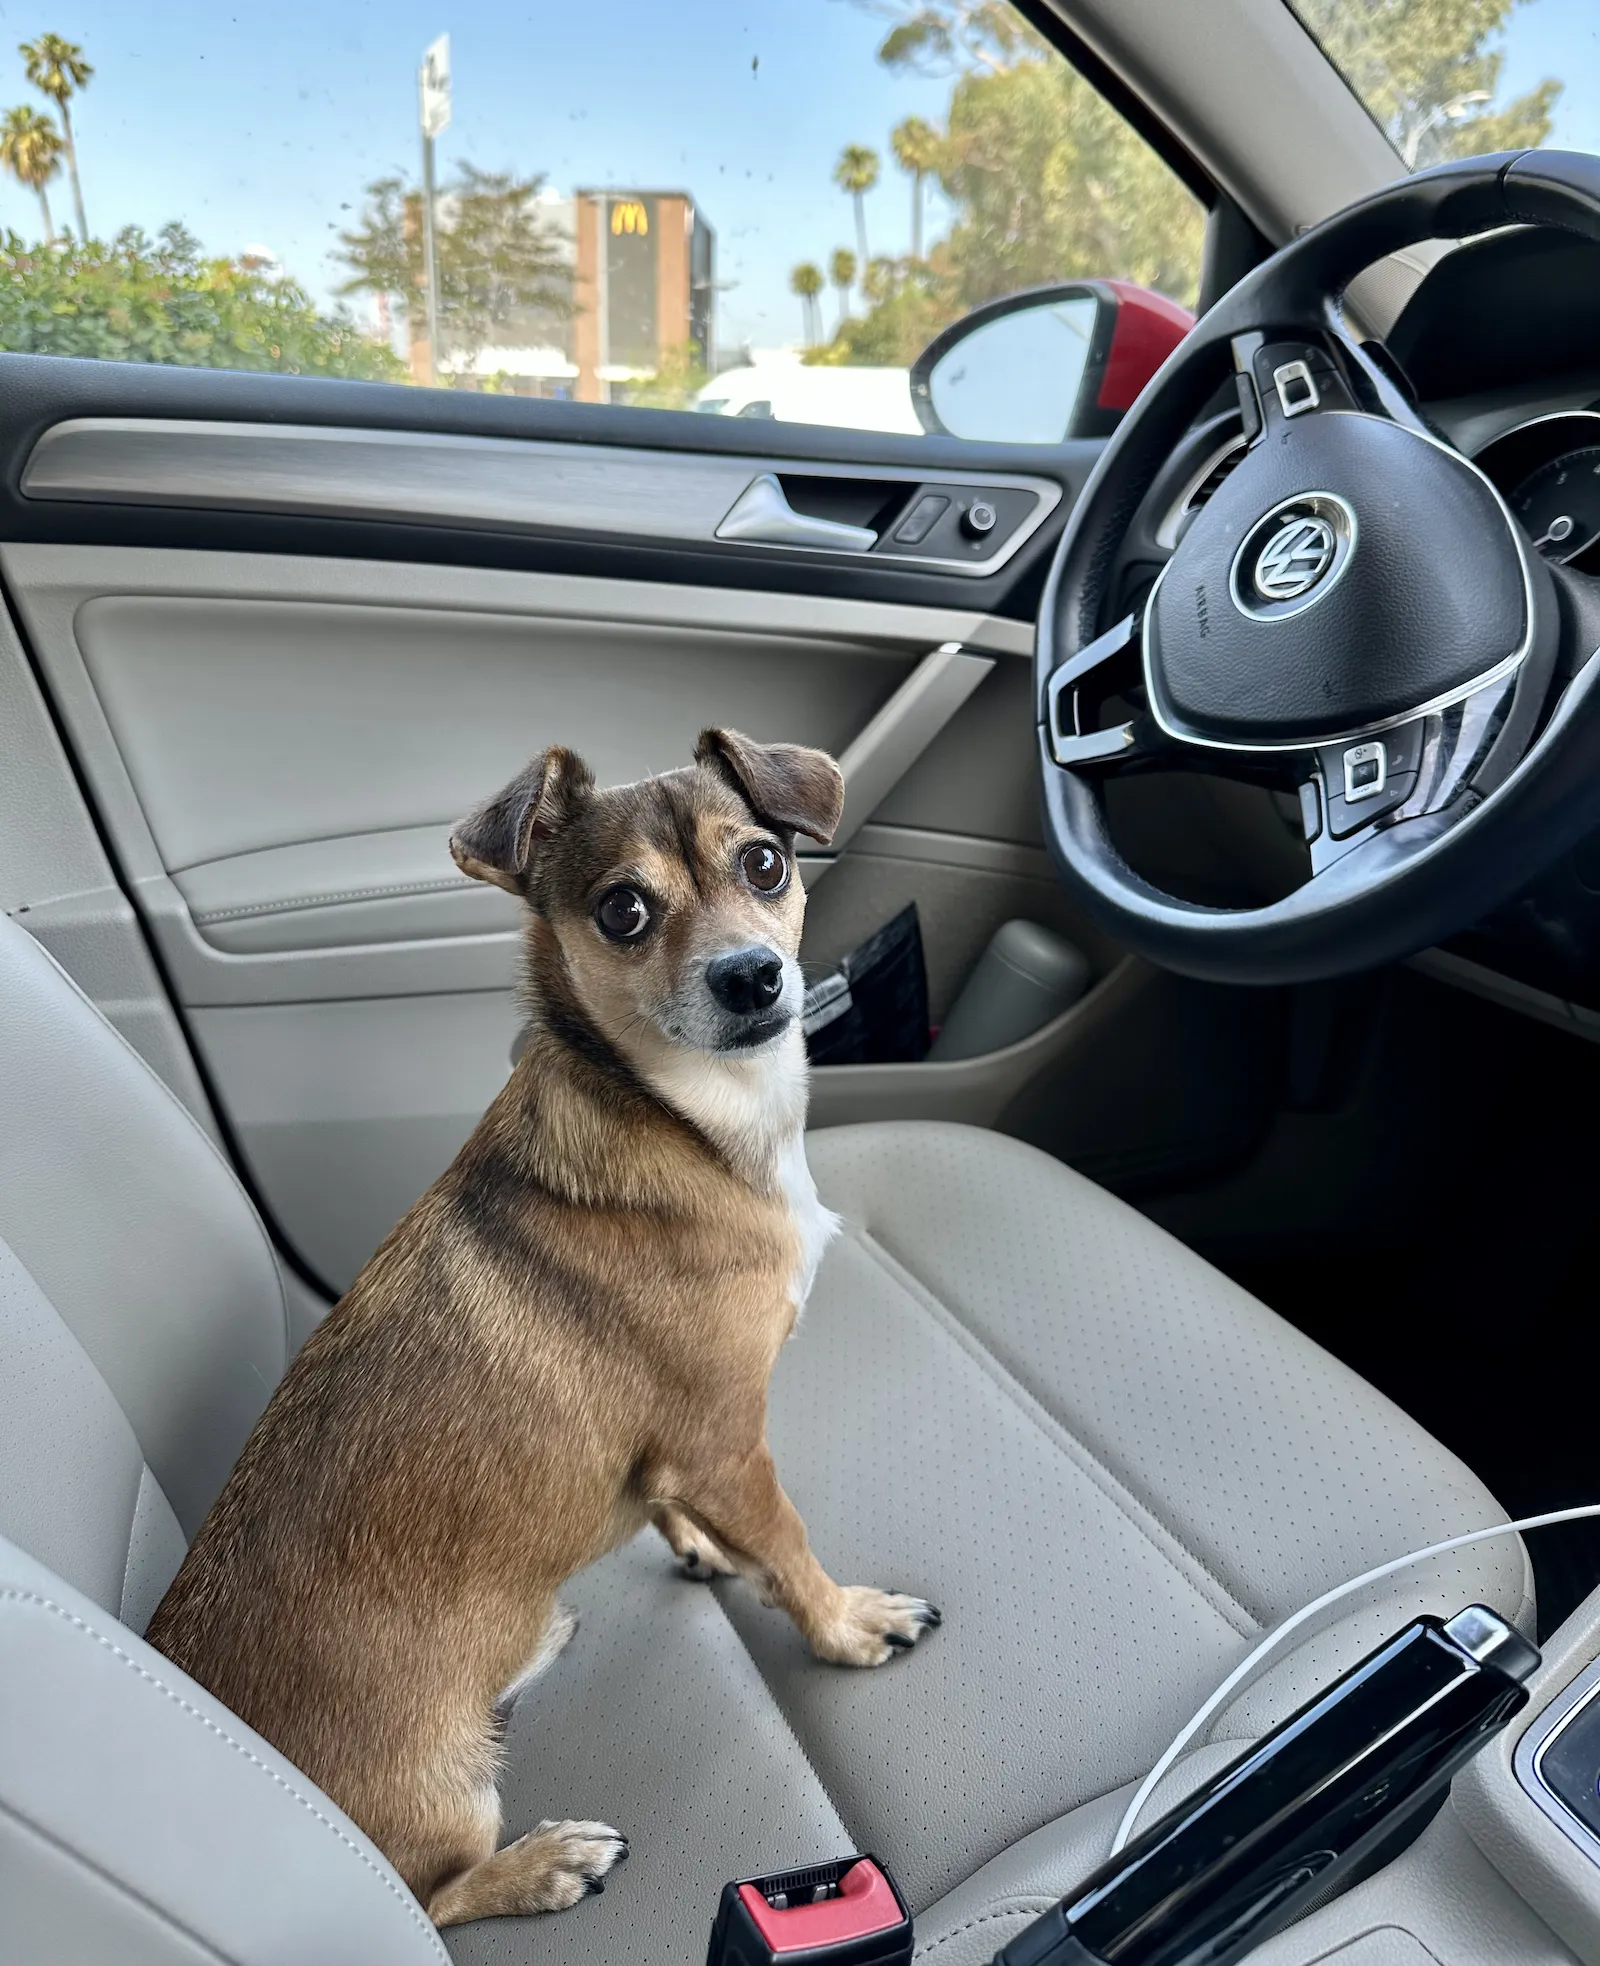 My small Chihuahua mix dog sits in the drivers seat of a car. McDonald's is blurry in the background.